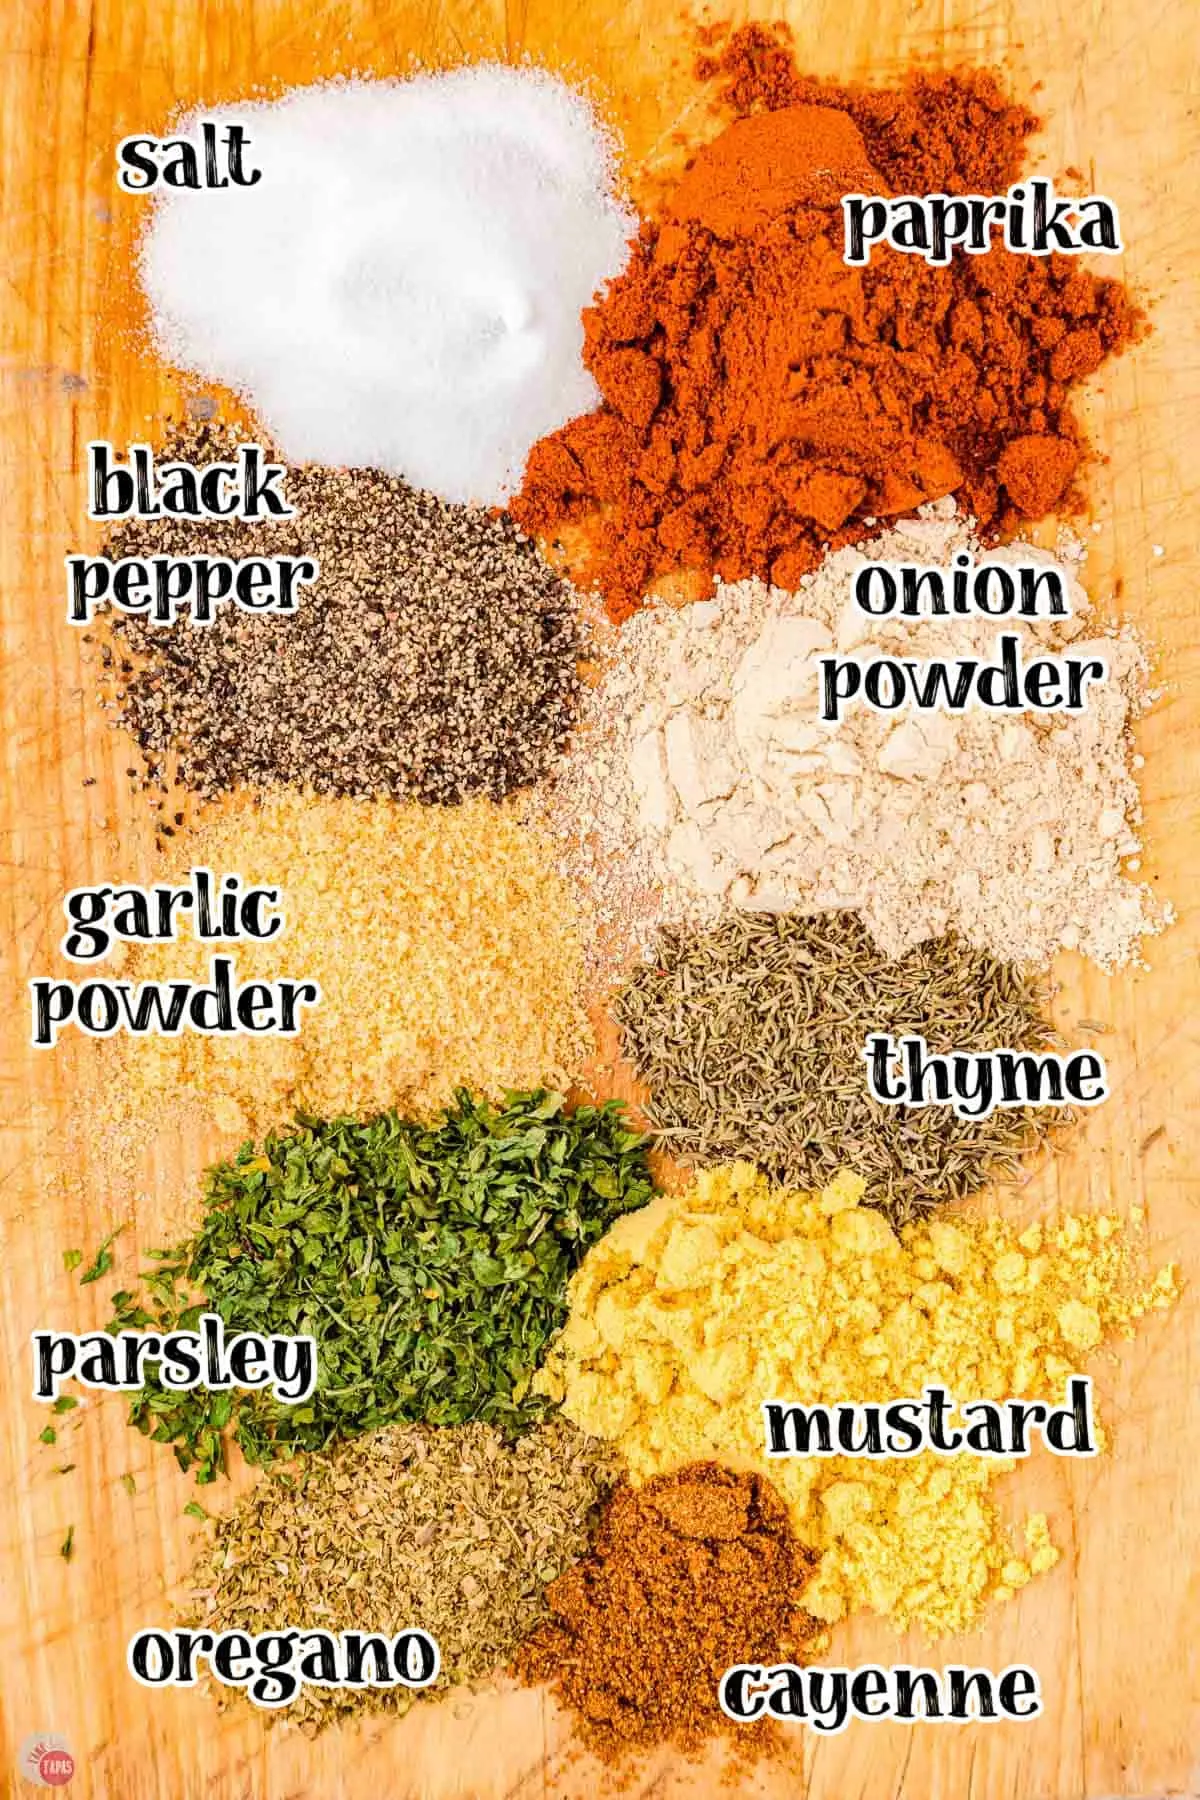 common ingredients in your spice drawer to season chicken